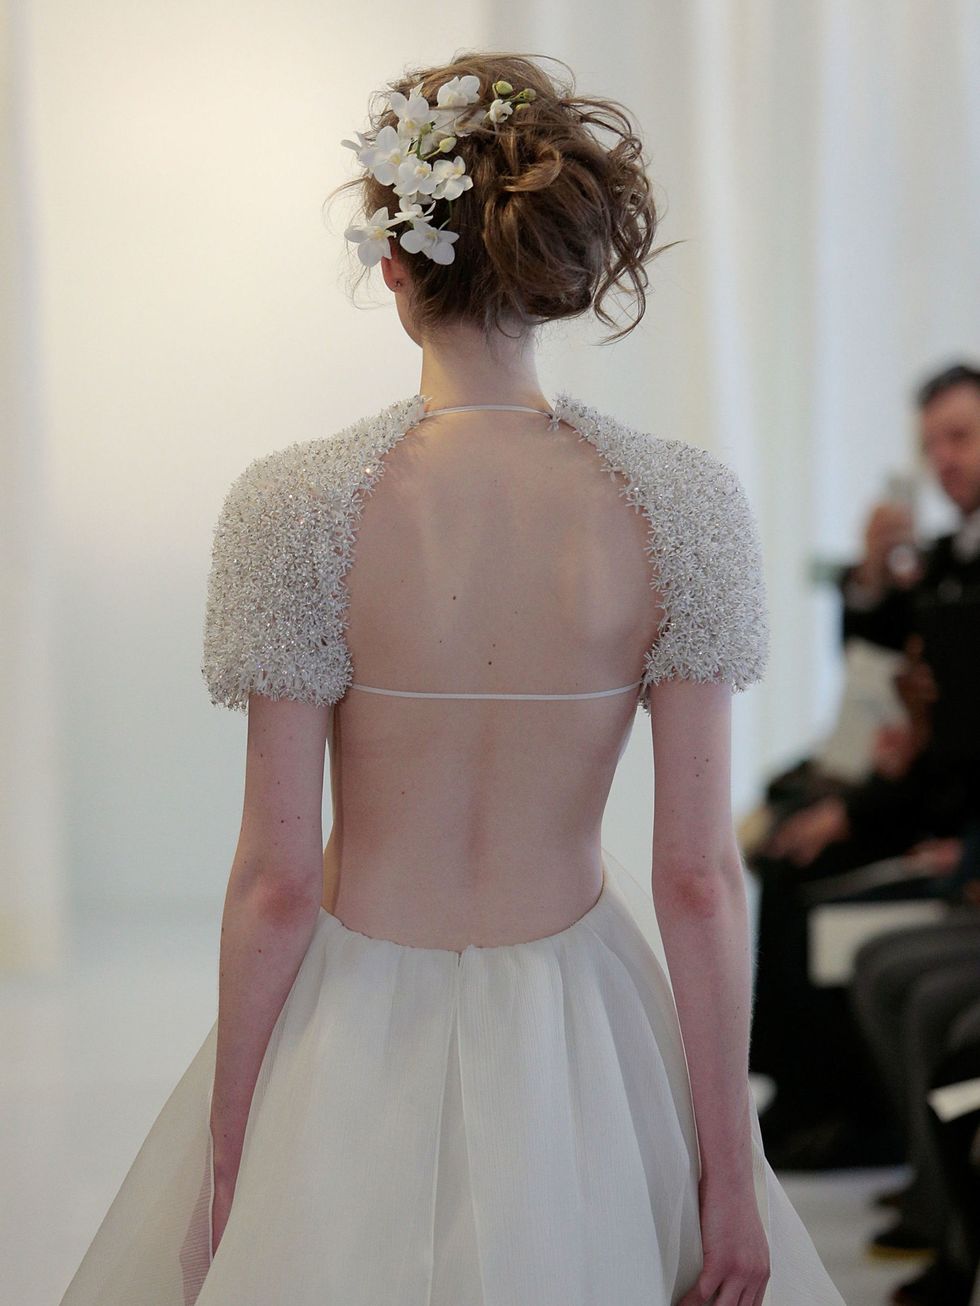 This messy up-do with white flowers blossoming from one side was pure romance at Angel Sanchez